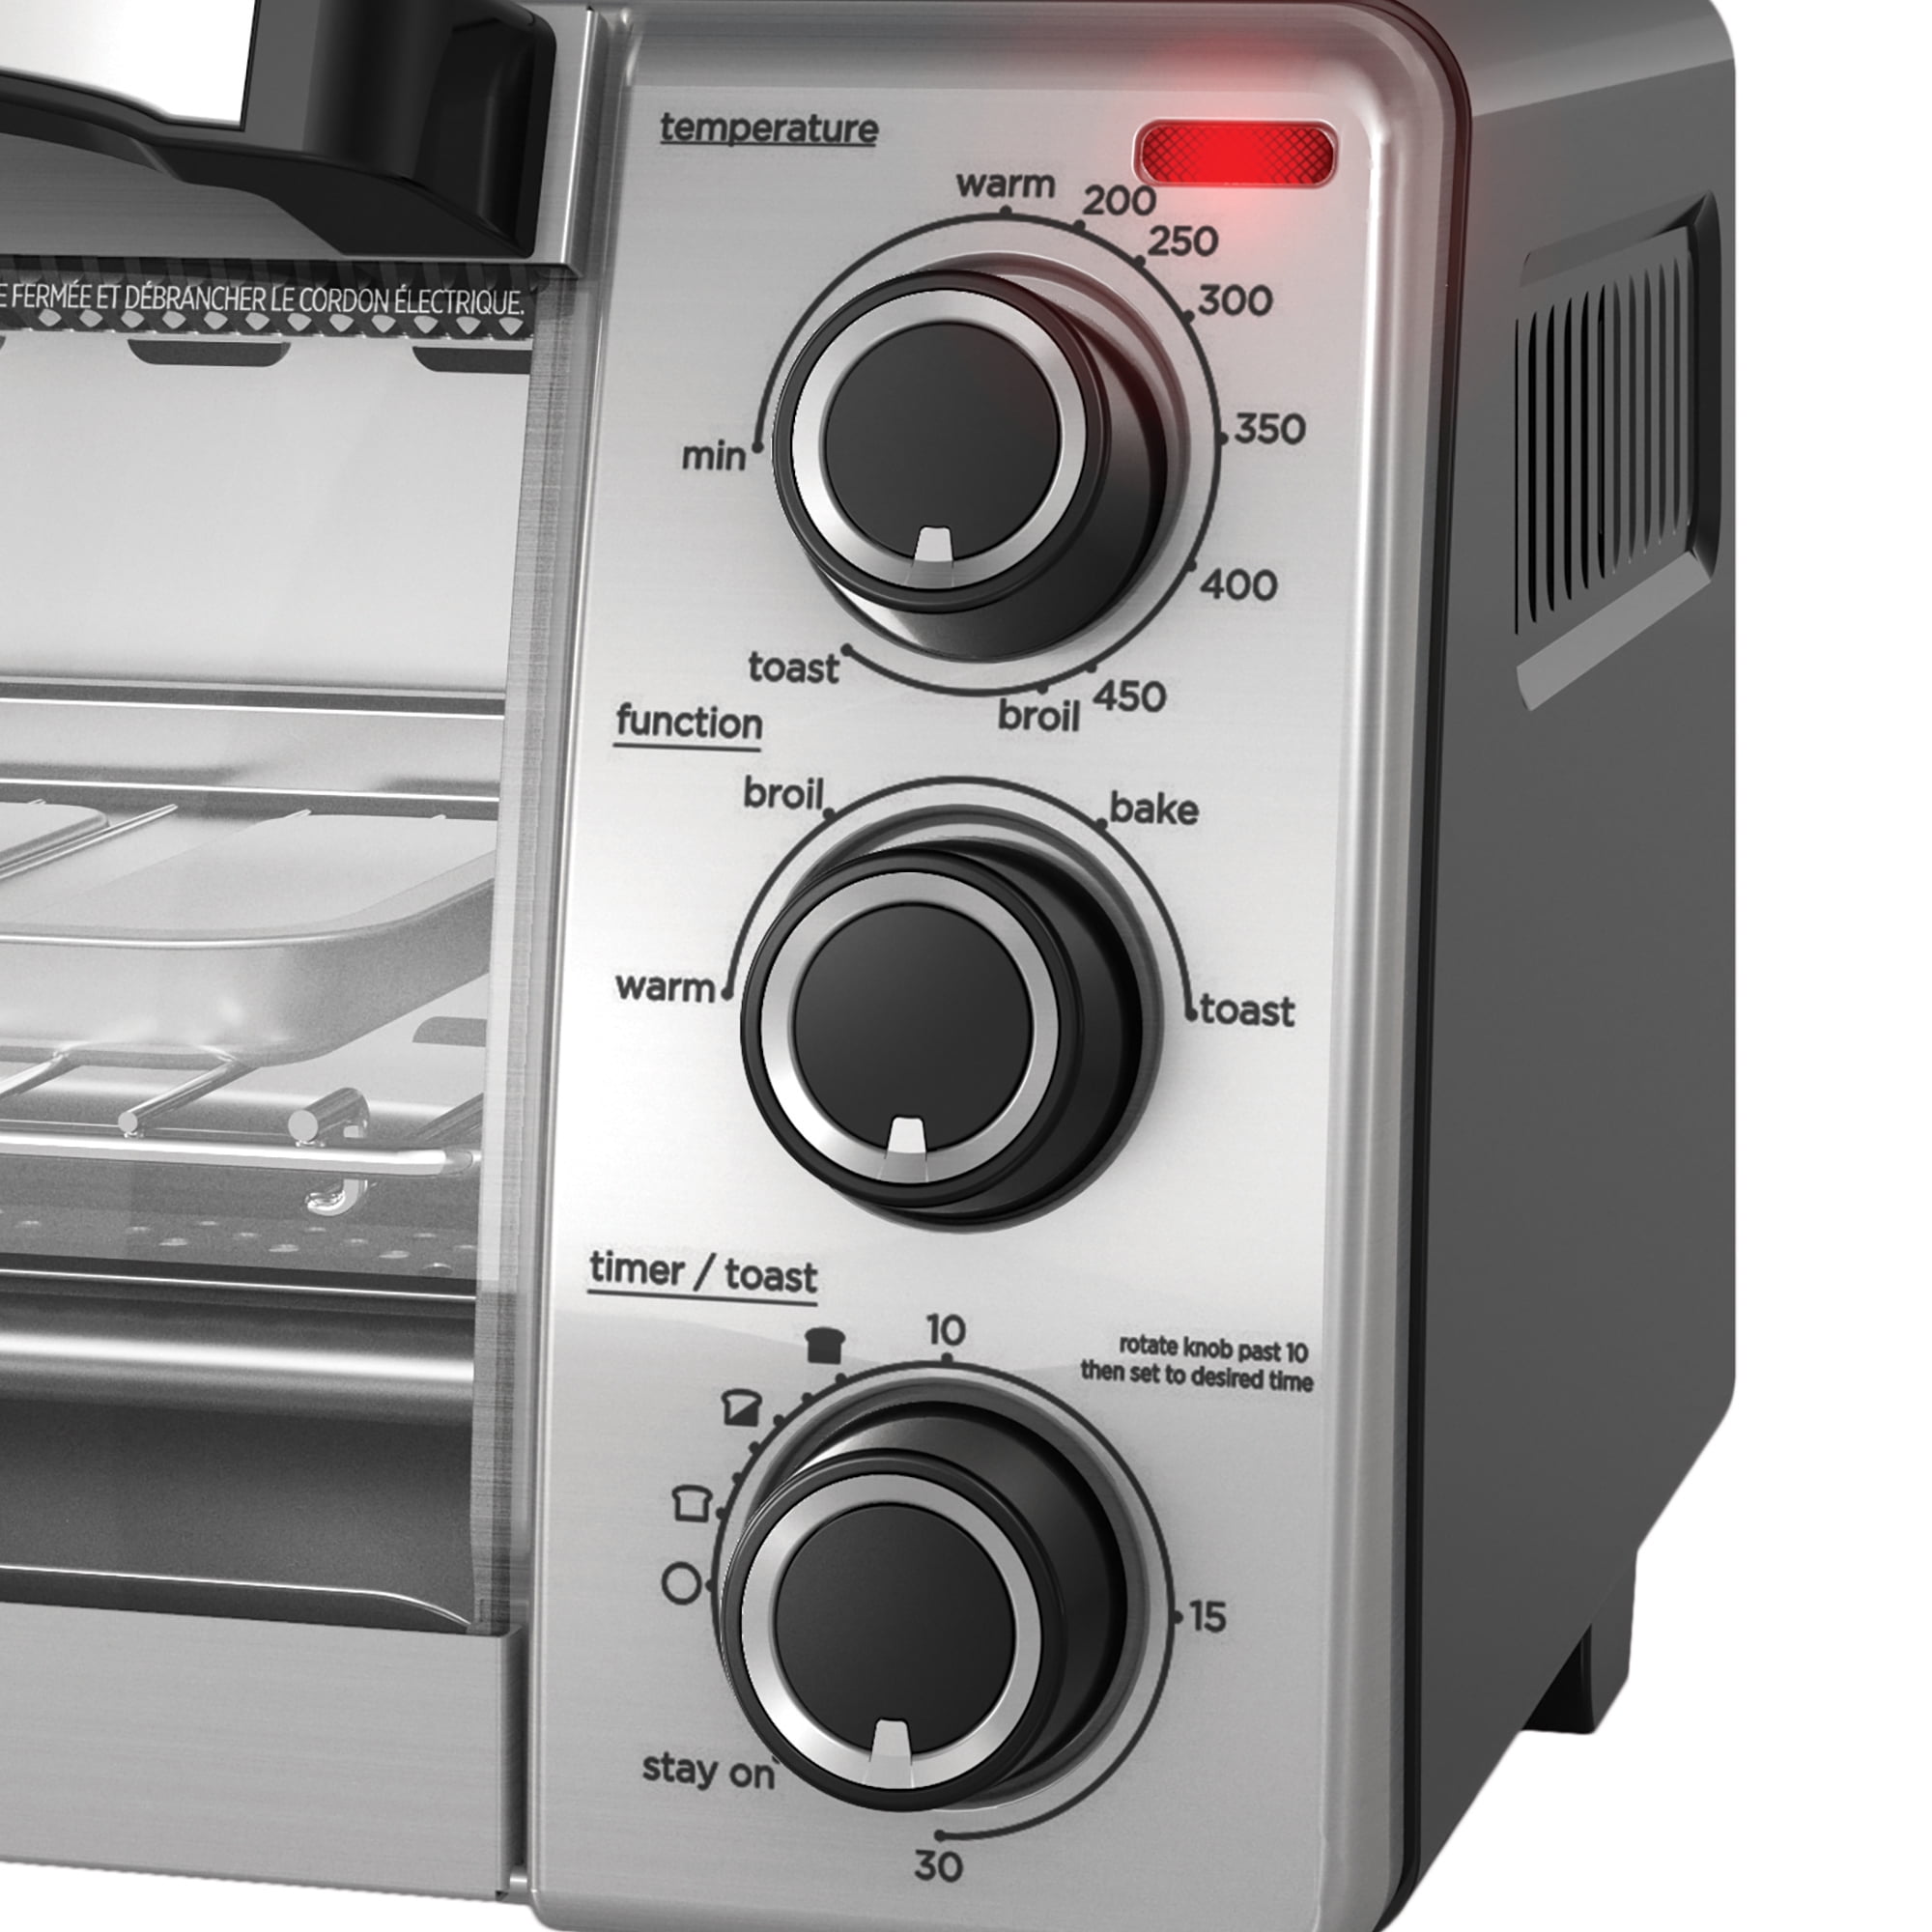  BLACK+DECKER 4-Slice Toaster Oven with Natural Convection, Black,  TO1750SB: Home & Kitchen